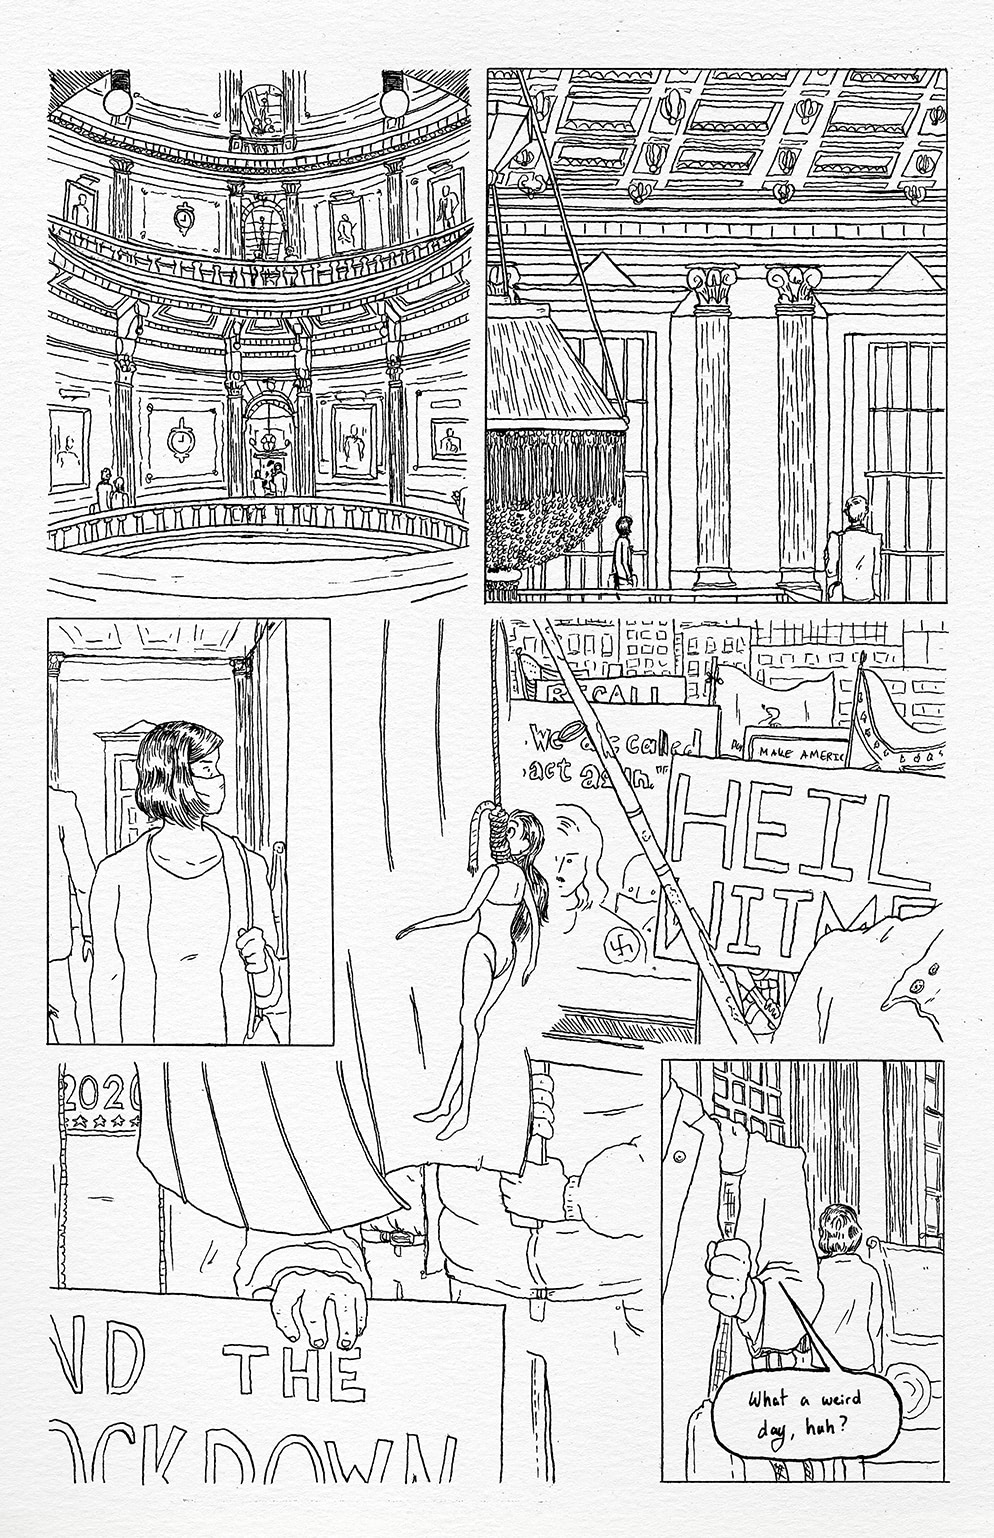 A depiction of the rotunda in the capitol building, leading to the House and Senate chambers. Representative Pohutsky is shown from a distance at the opposite side of the gallery in the House chamber, the balcony area. Rep. Pohutsky holds onto her bag with one hand and looks out the window, down at the crowd she had passed through on her way into the building. Most prominently shown is a naked doll hanging by a noose from a fishing pole that also has an American flag attached to it. It is surrounded by various signs, including ones that read “Heil Whitmer”, “Recall Whitmer”, “End The Lockdown”, and “Make America Great Again.” Another sign depicts Governor Gretchen Whitmer as Adolf Hitler, and the sign reads “We are called to act again.” Flags are being waived in the background, including another American flag, a Gadsden flag, and a Confederate Flag. Back in the gallery of the House chamber, an unspecified male representative remarks, “What a weird day, huh?”